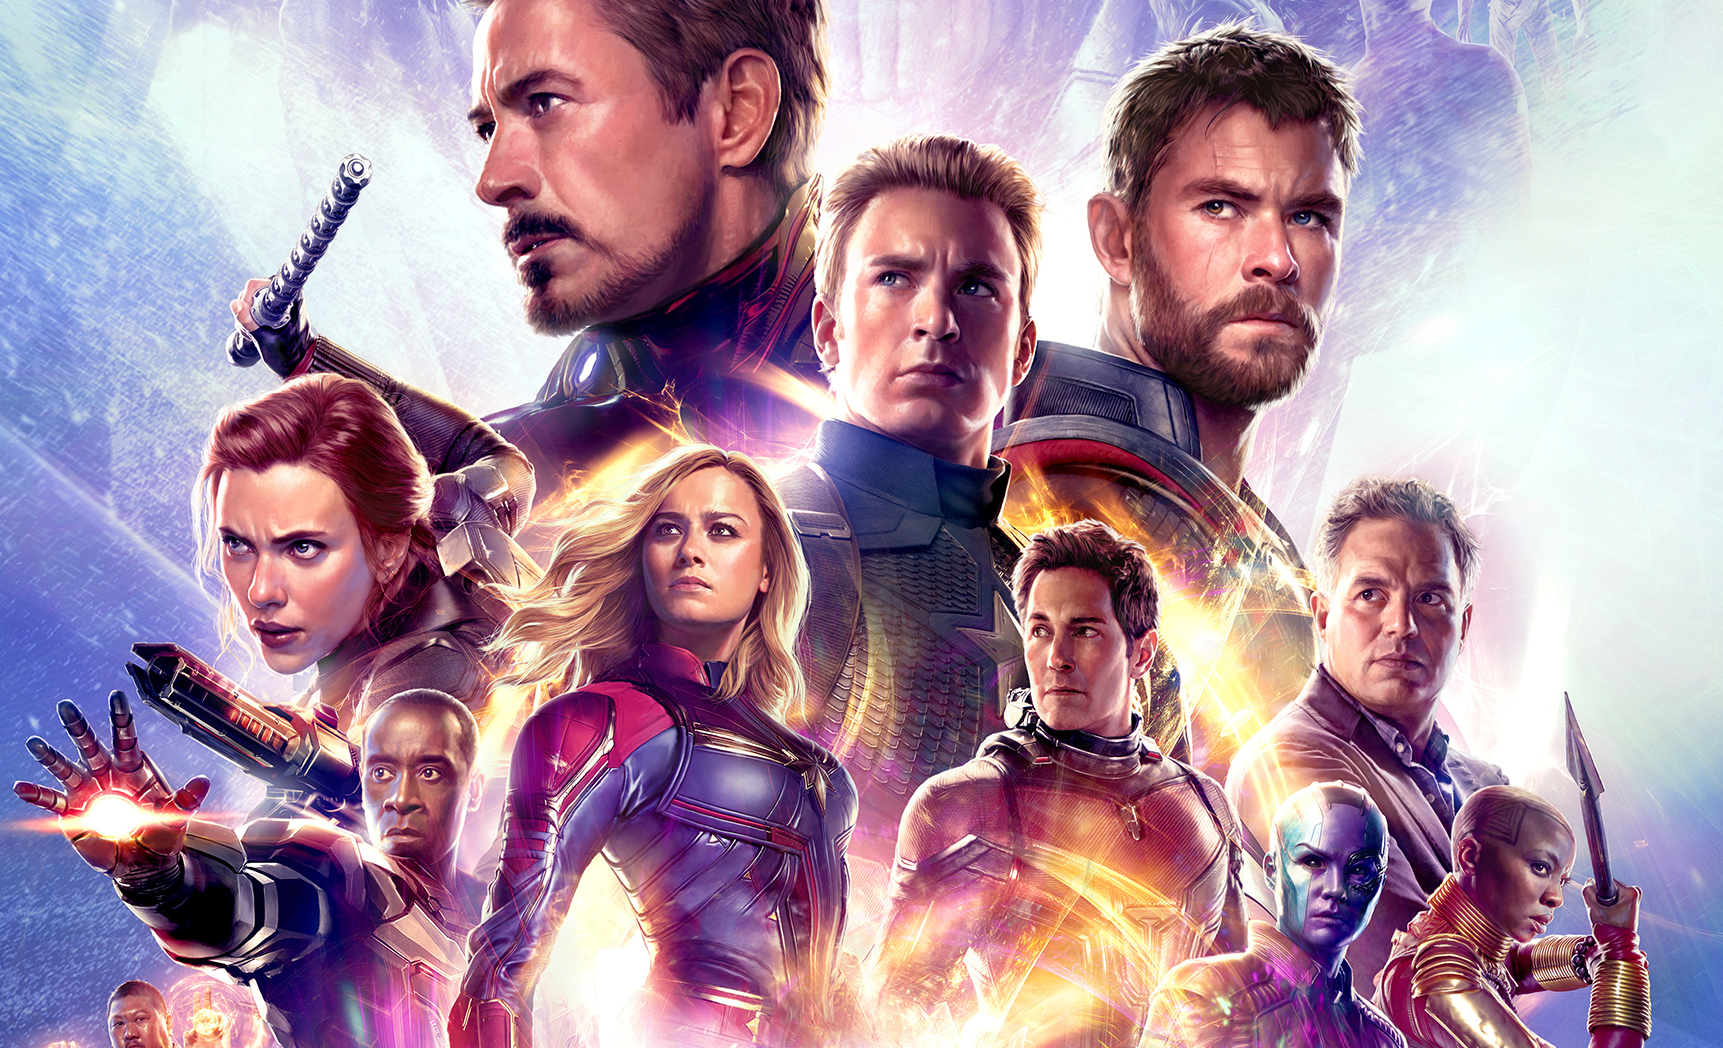 Avengers: Endgame TV spots feature new footage from the Marvel blockbuster1723 x 1048